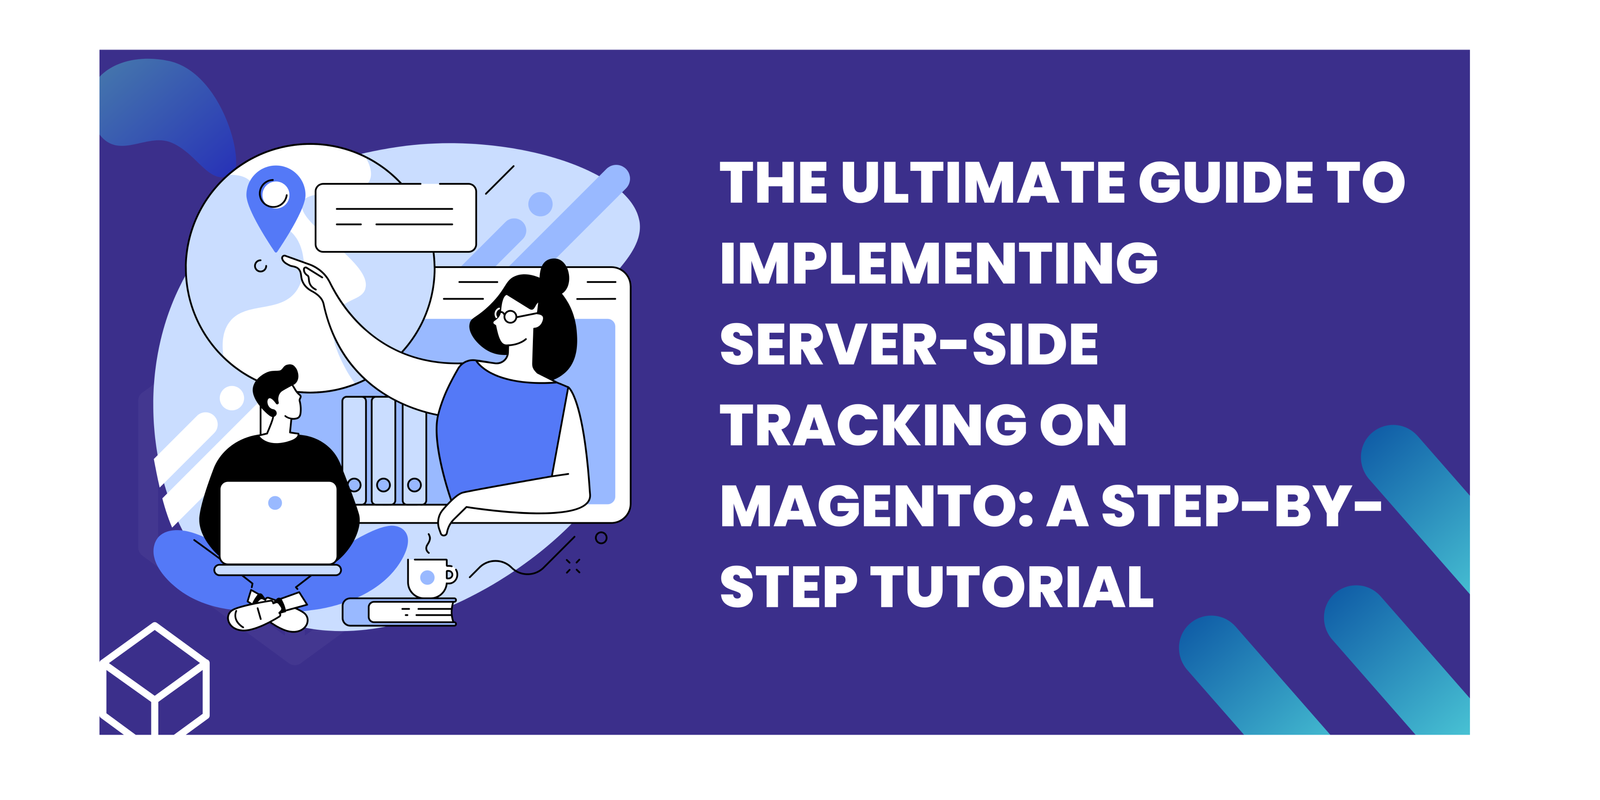 The Ultimate Guide to Implementing Server-Side Tracking on Magento: A Step-by-Step Tutorial